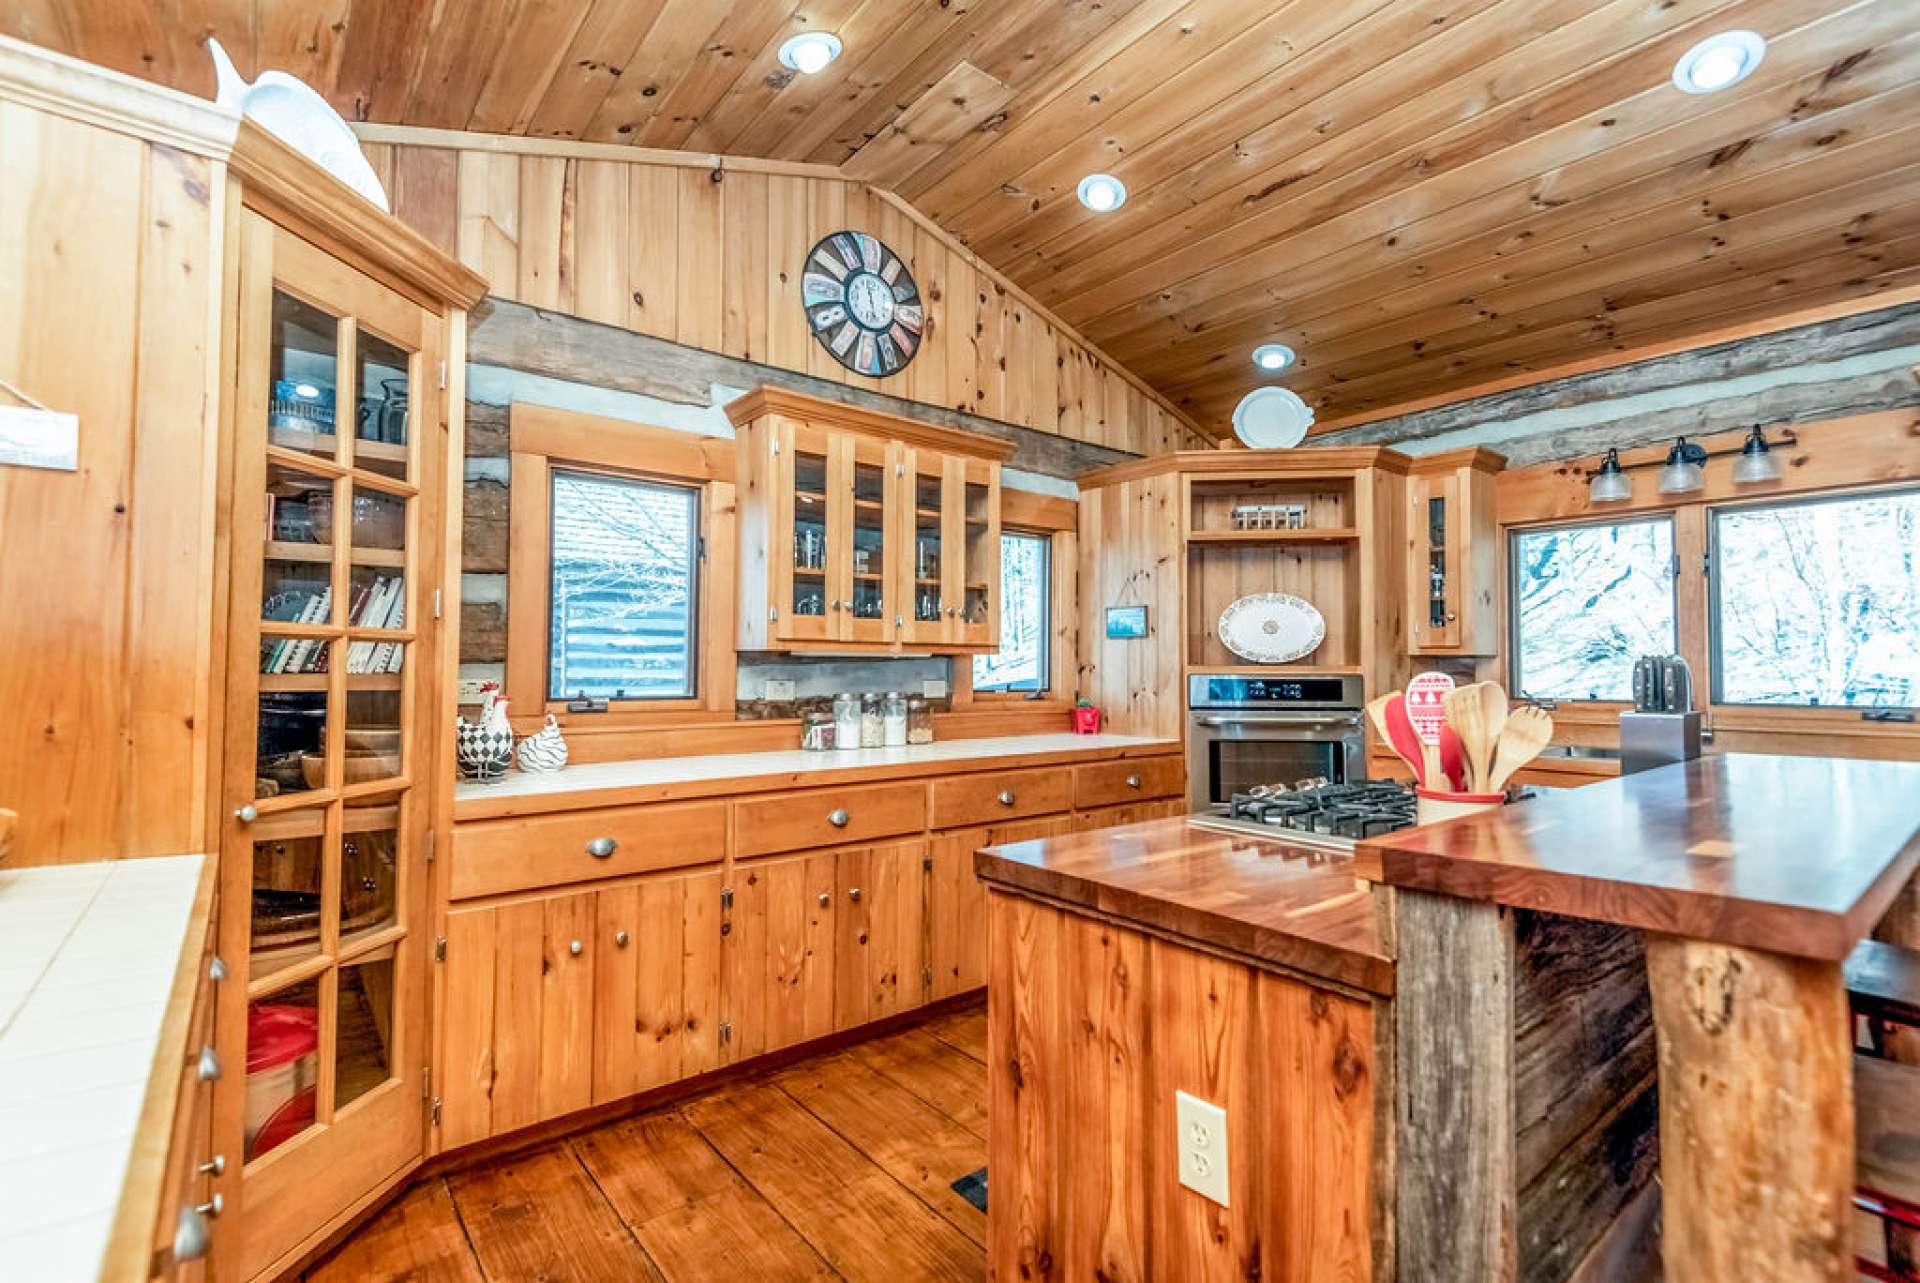 Island's countertops are a beautiful shiny wood and the bar is contrasted with reclaimed barn wood. This piece intertwines rustic and sleek for a style all it's own. Custom cabinetry and corner pantry provide ample storage for dishes, cookware and canned goods.